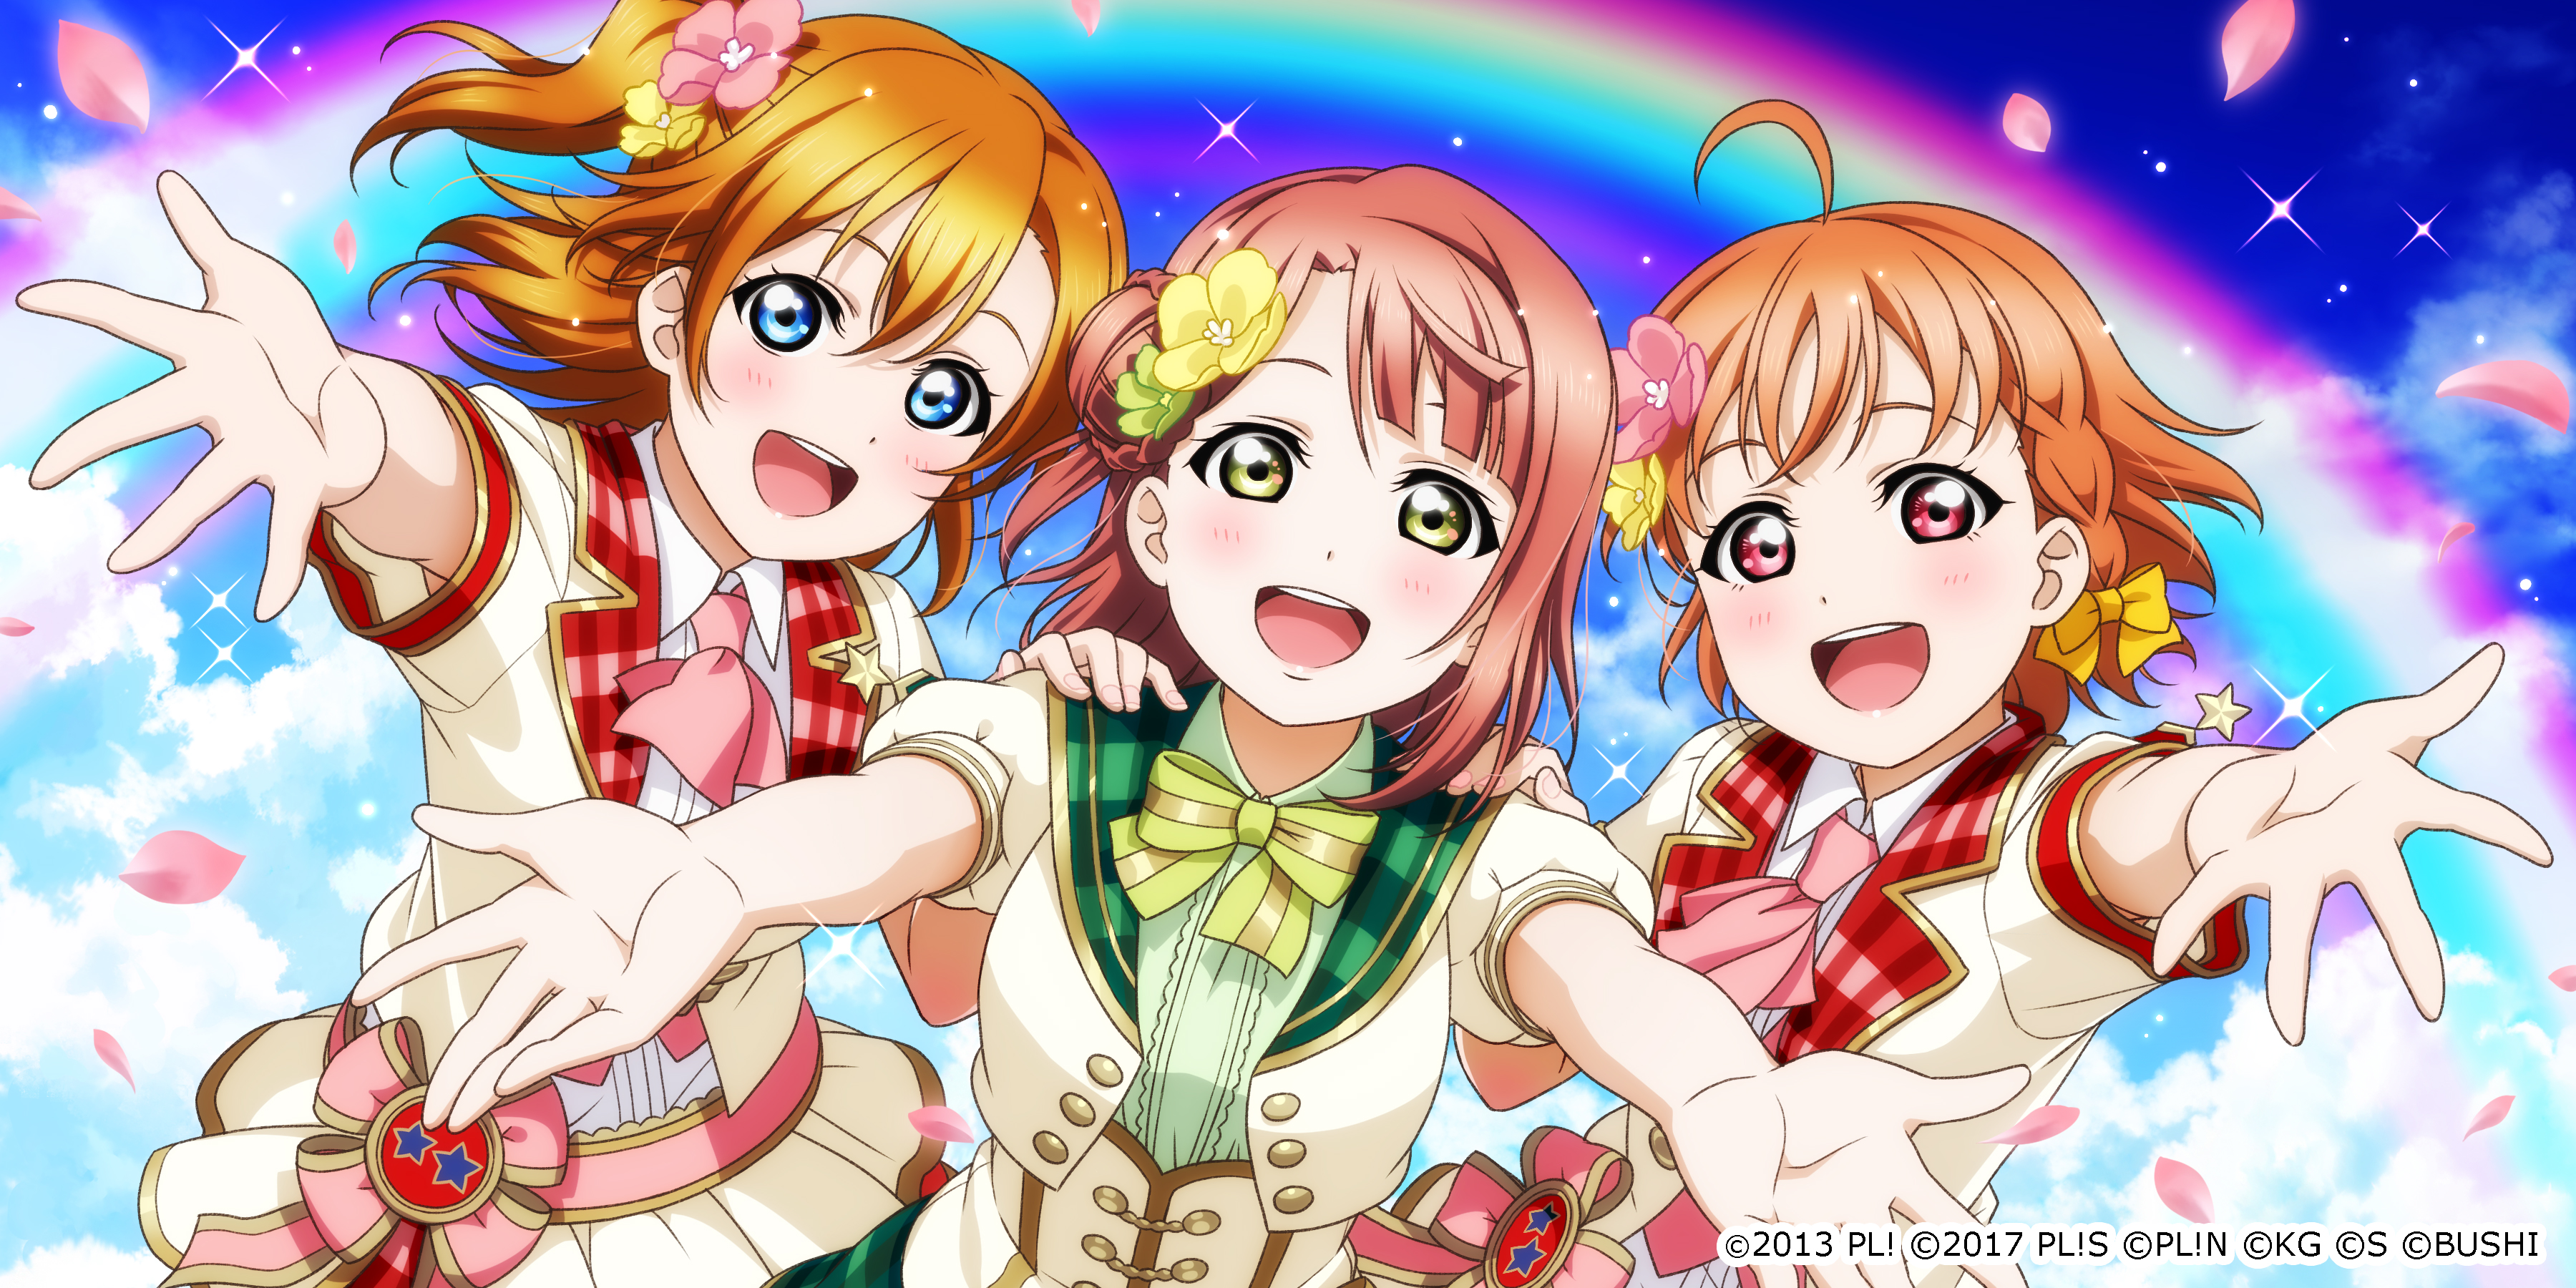 Love Live! 🌼 Idol Story 🎀 on X: 🇯🇵 The SIF Series Kanshasai 2020  ~ONLINE~ login bonus is now underway! Log in each day for 5 days from  October 31st, 4:00 JST 